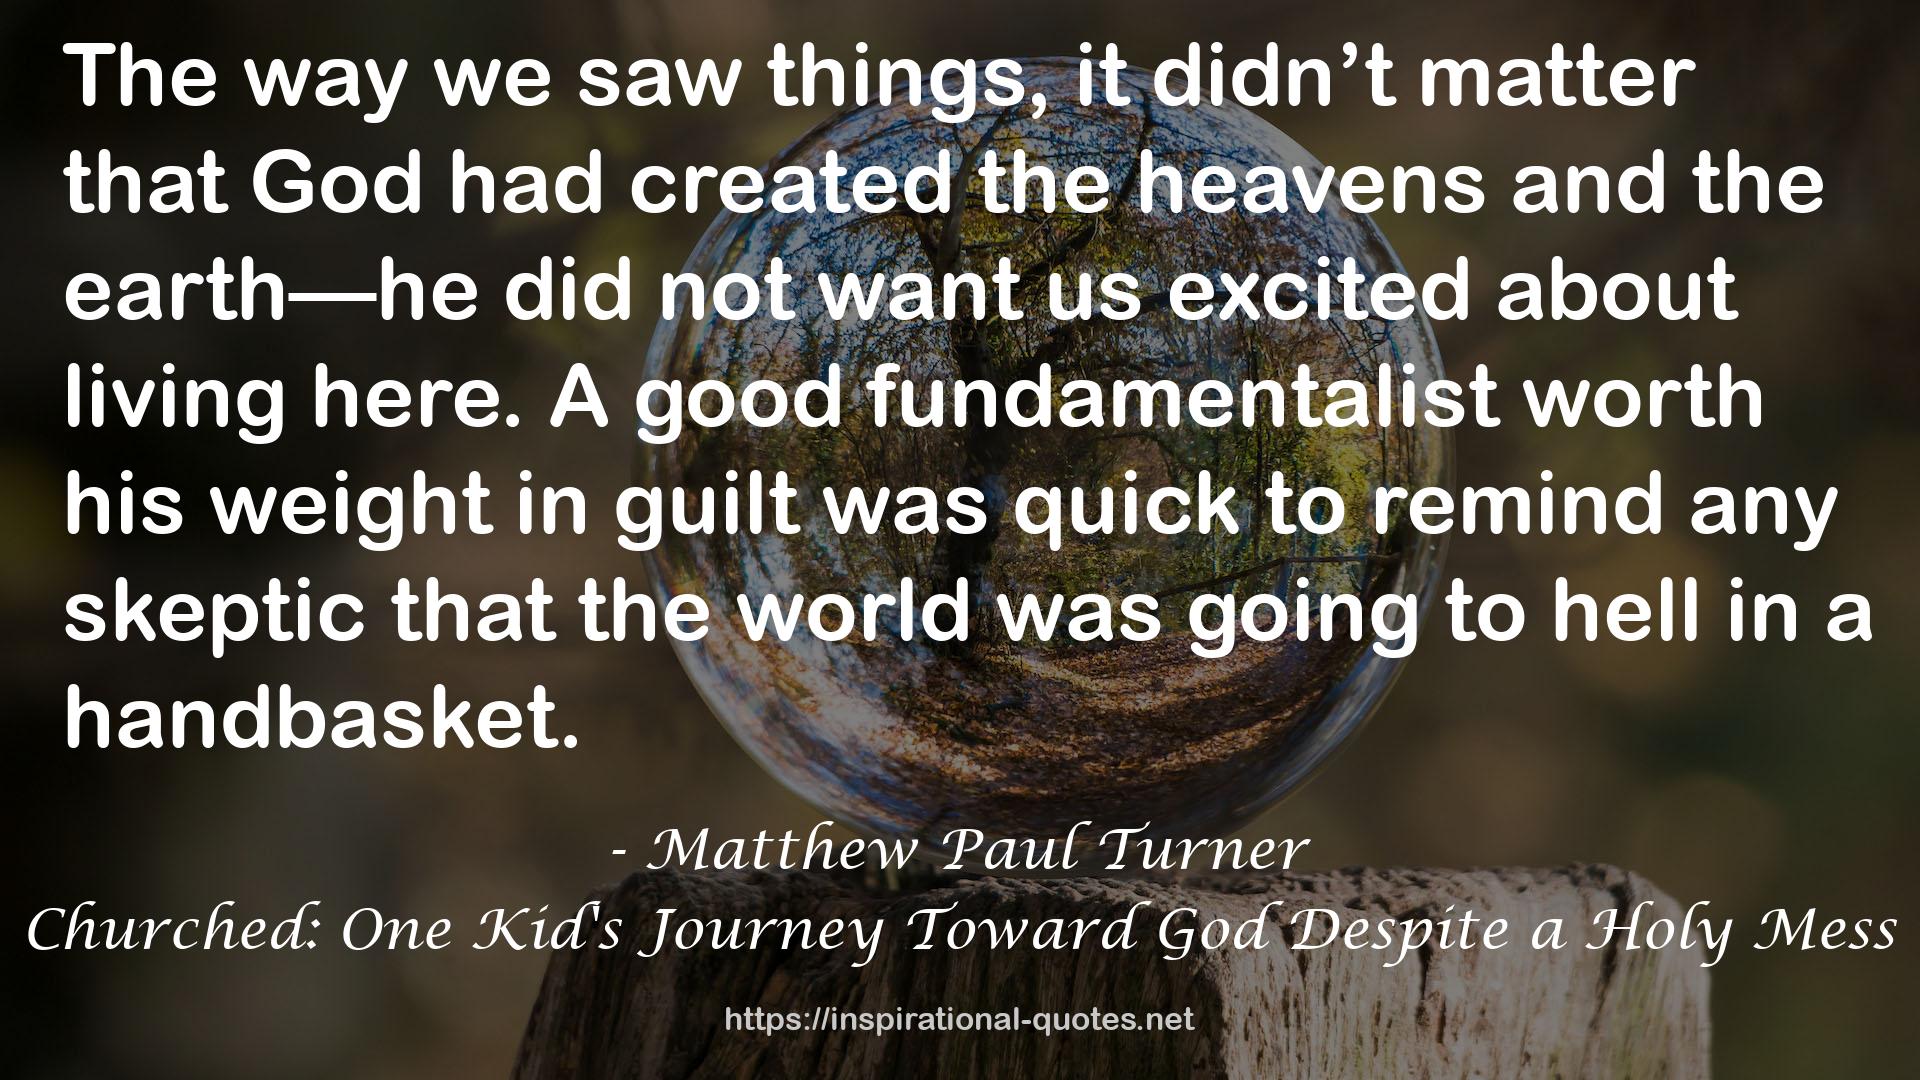 Churched: One Kid's Journey Toward God Despite a Holy Mess QUOTES